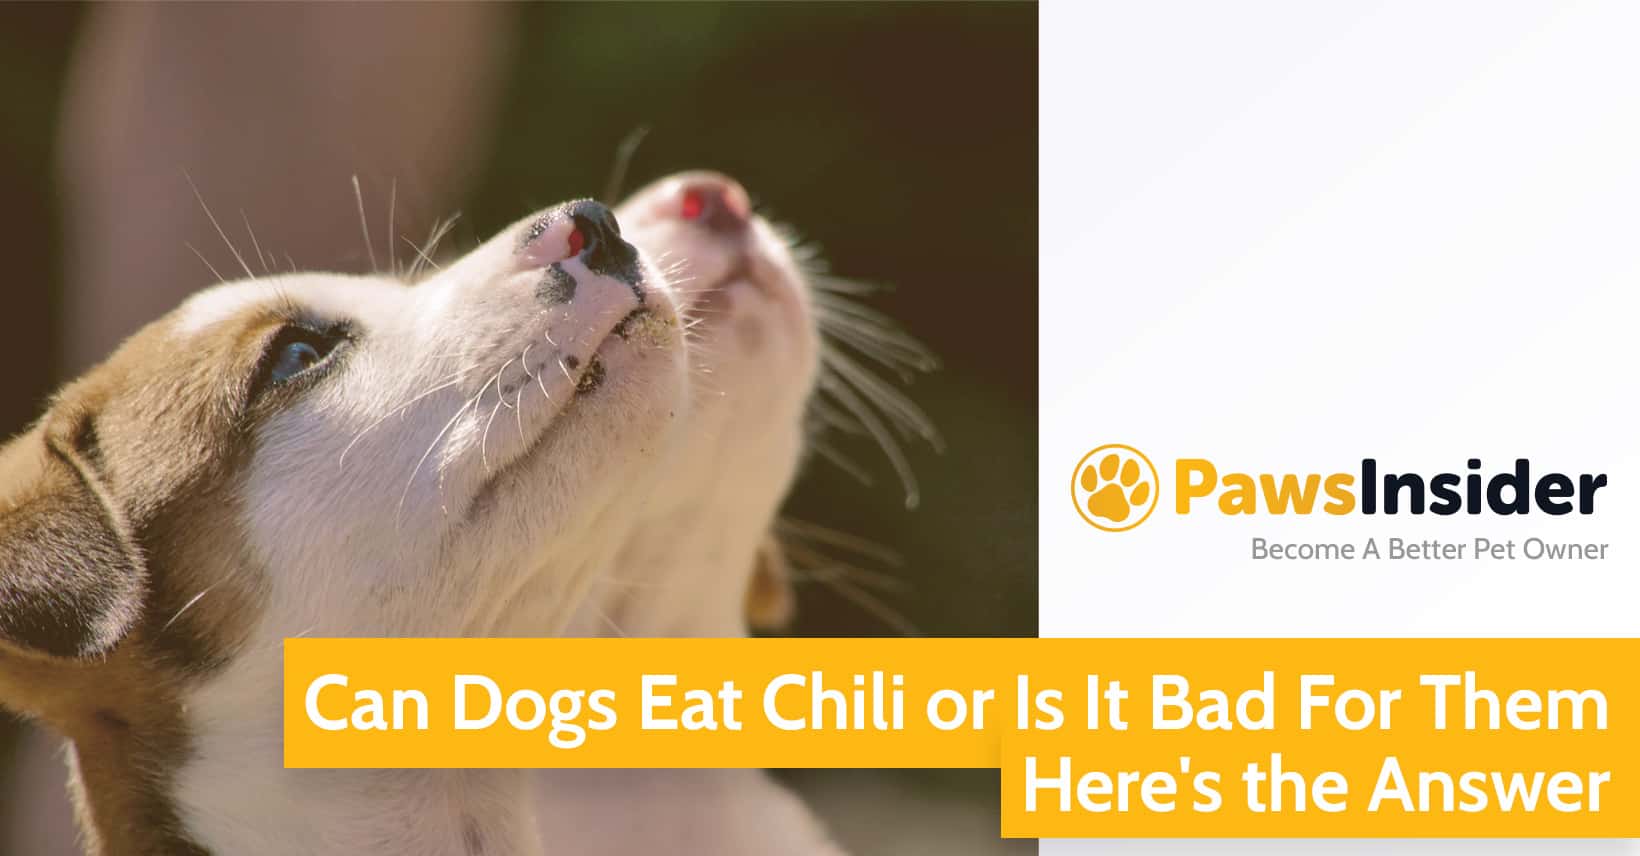 Can Dogs Eat Chili or Is It Bad For Them? Here's the Answer